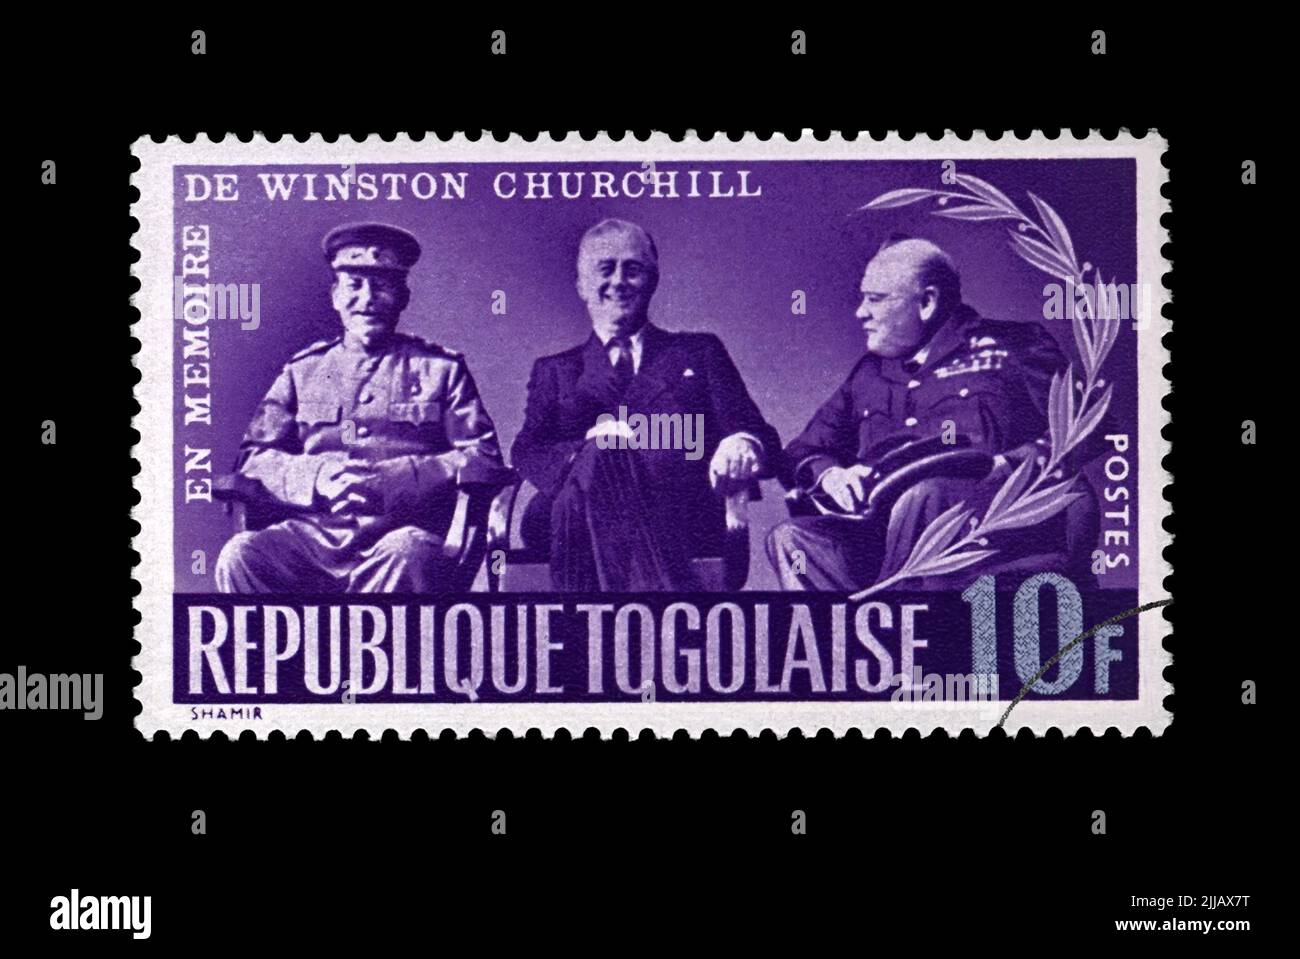 Yalta conference during World War II. Stalin, Roosevelt and Churchill. cancelled vintage postal stamp printed in Togo, circa 1965. Stock Photo